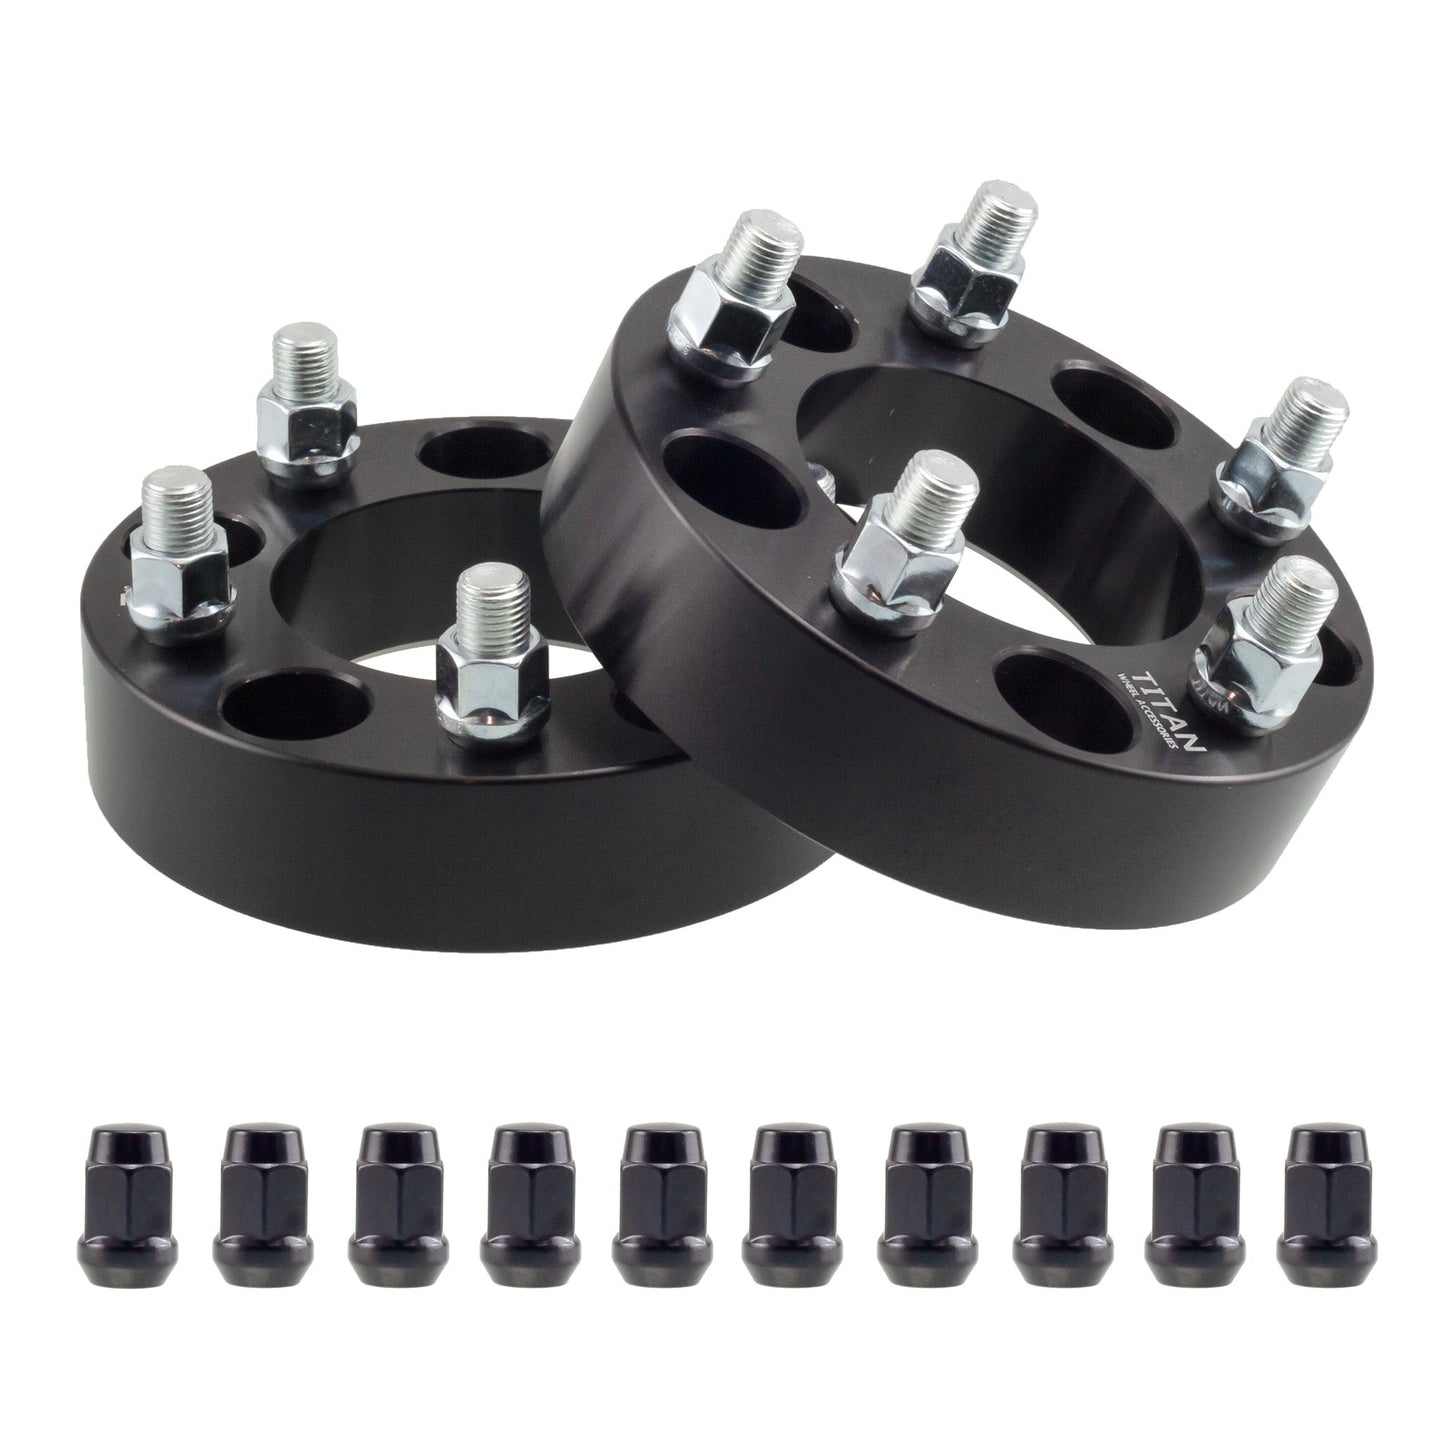 1" (25mm) Titan Wheel Spacers for Chrysler 300 Dodge Challenger Charger | 5x4.5 | 71.5 Hubcentric |14x1.5 Studs | Titan Wheel Accessories